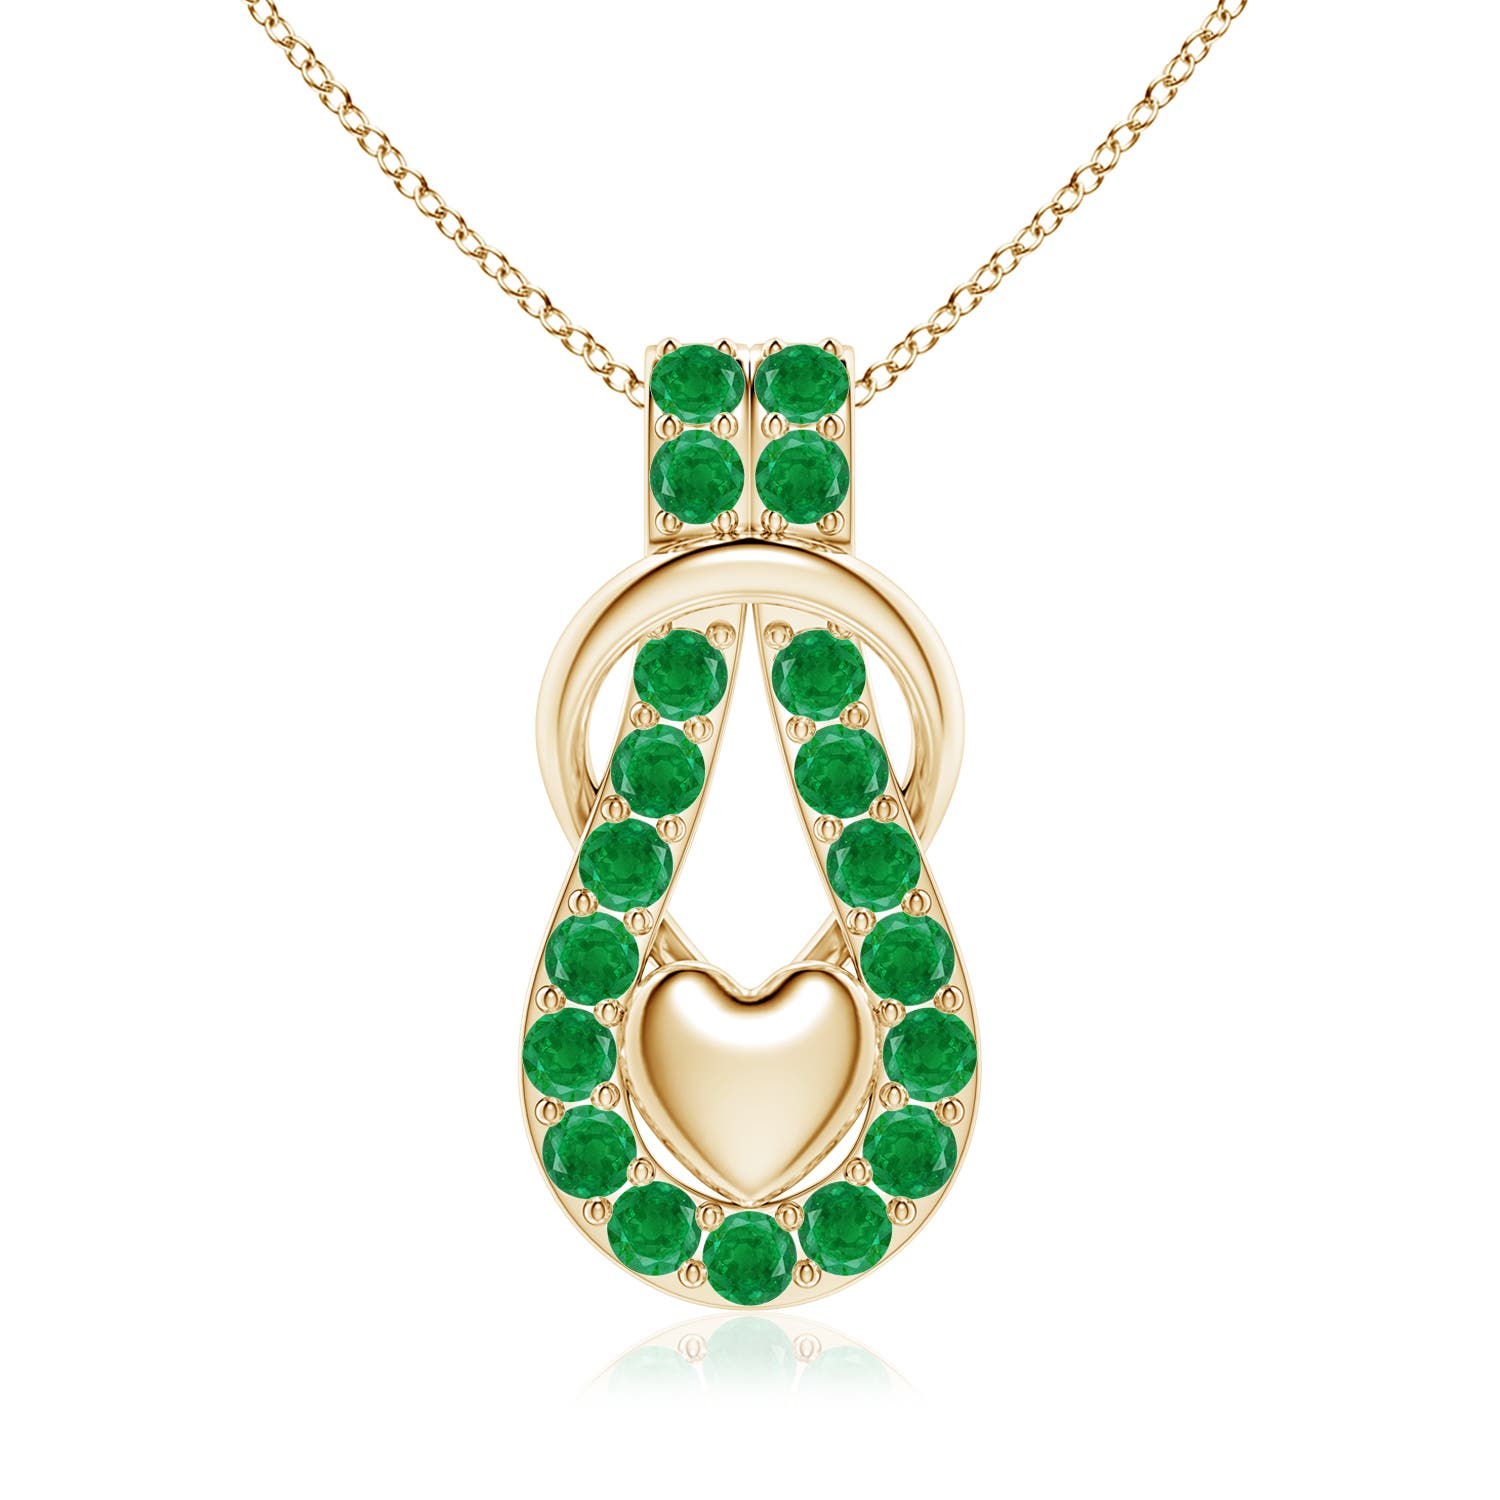 AA - Emerald / 2.85 CT / 18 KT Yellow Gold